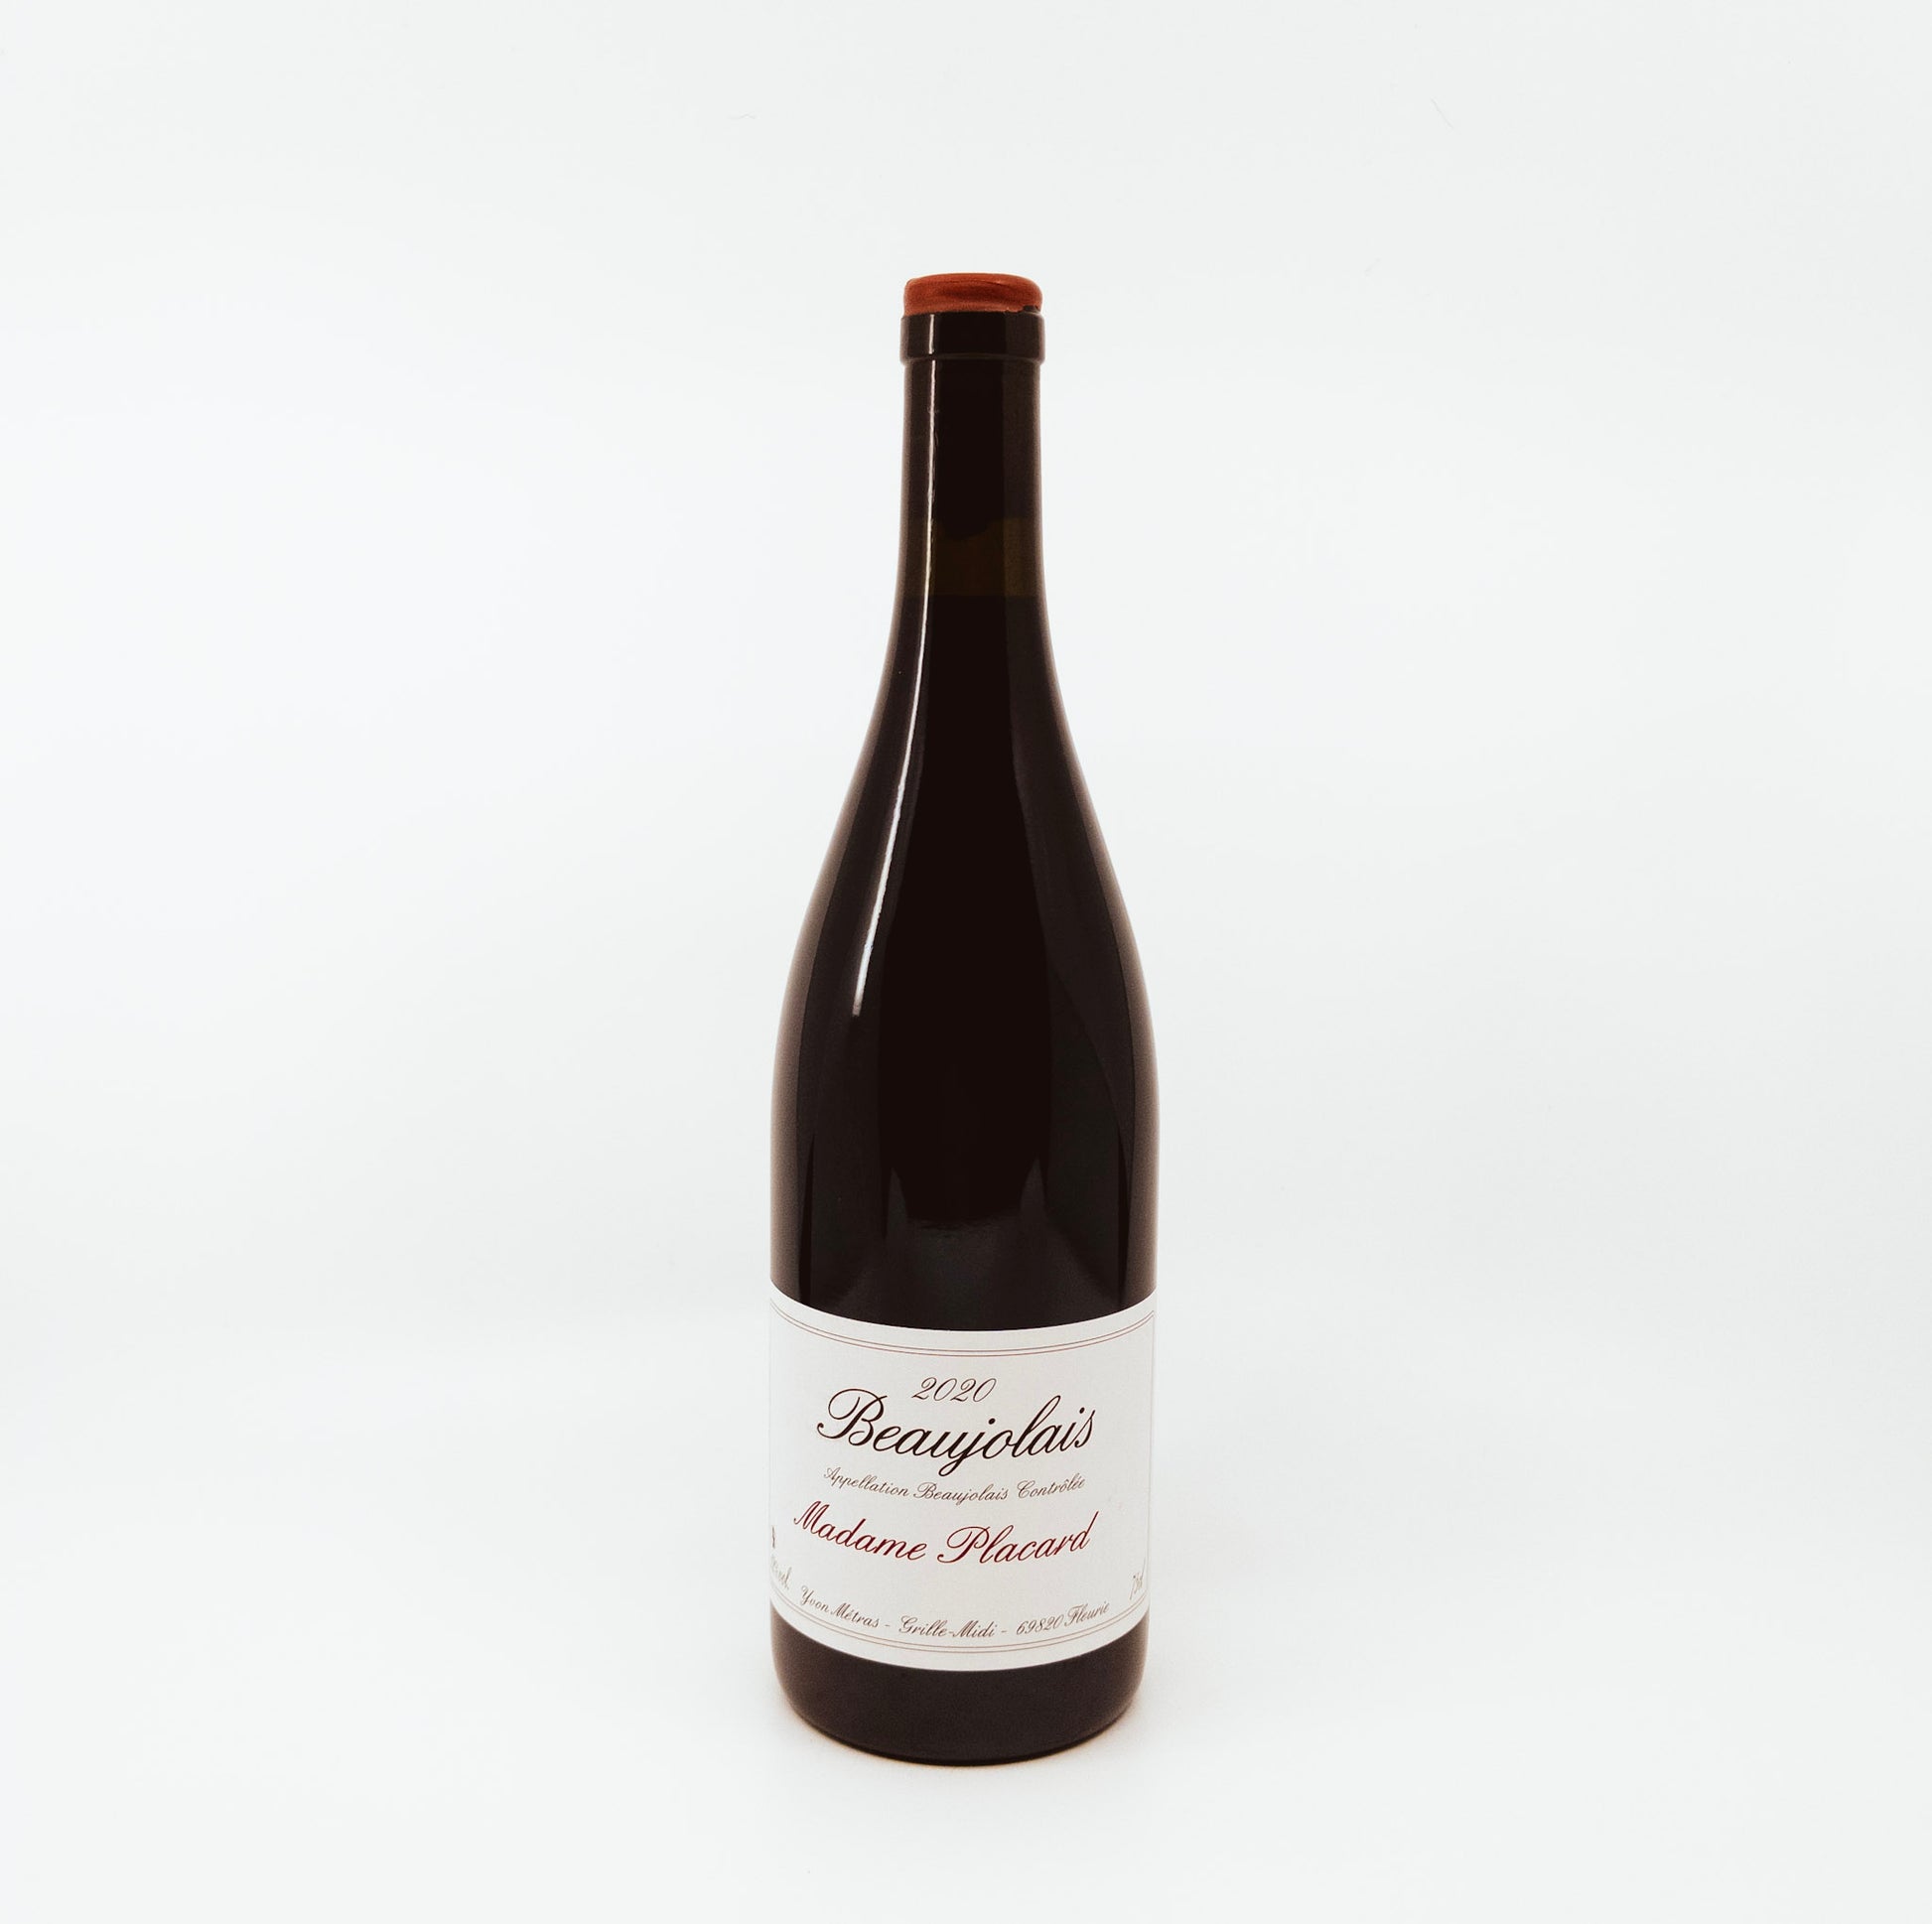 bottle with cursive writing on label